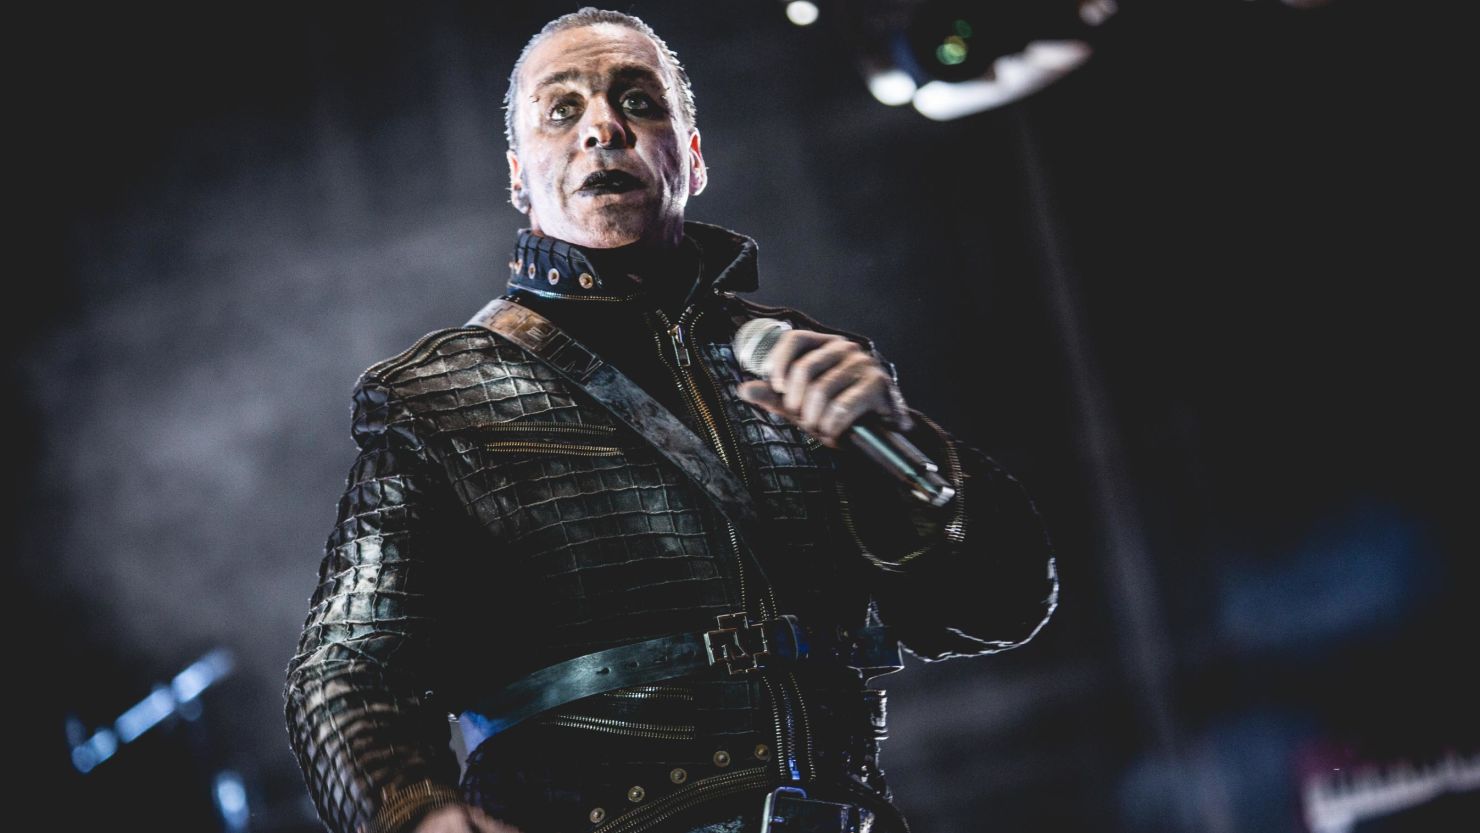 The singer Till Lindemann in concert with the Rammstein at the heavy metal music festival Gods Of Metal staged at the Autodromo Nazionale Monza. Monza, Italy. 2nd June 2016 (Photo by Francesco Castaldo/Archivio Francesco Castaldo/Mondadori via Getty Images)